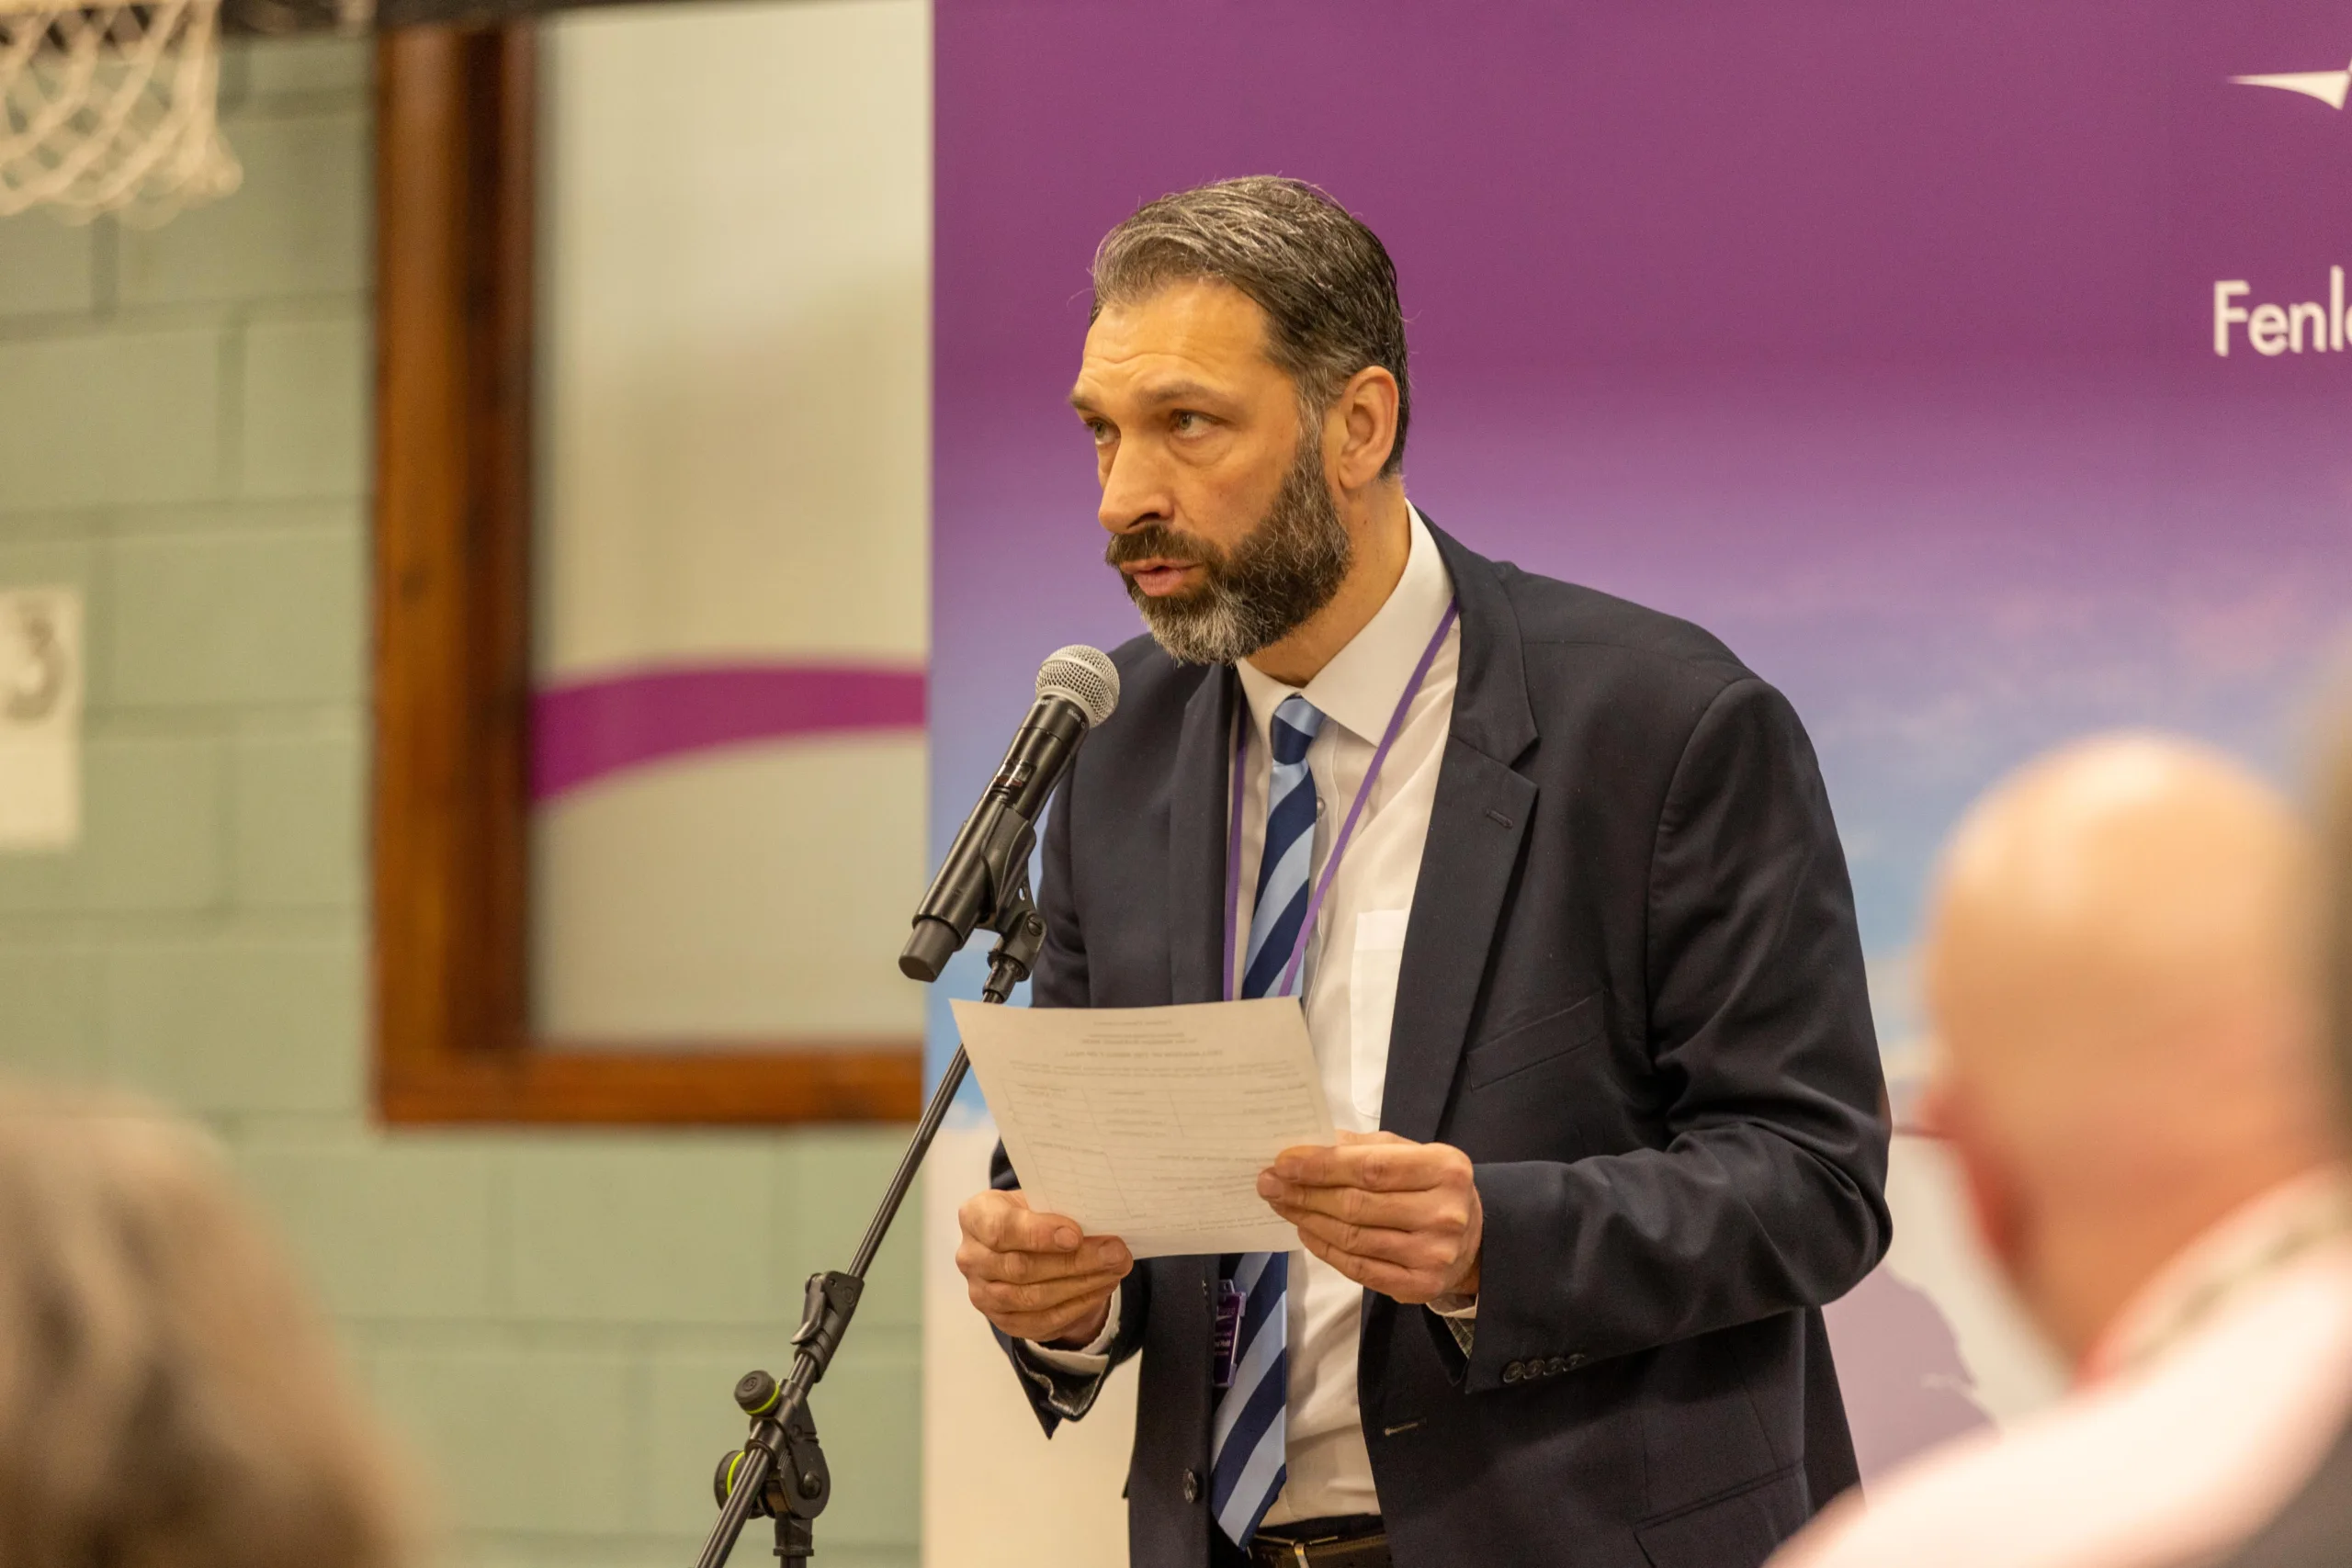 Fenland Council chief executive Paul Medd has signed off a report to the employment committee setting out the issues and outlining areas of poor performance in planning that could lead to Government intervention. Photo: Terry Harris